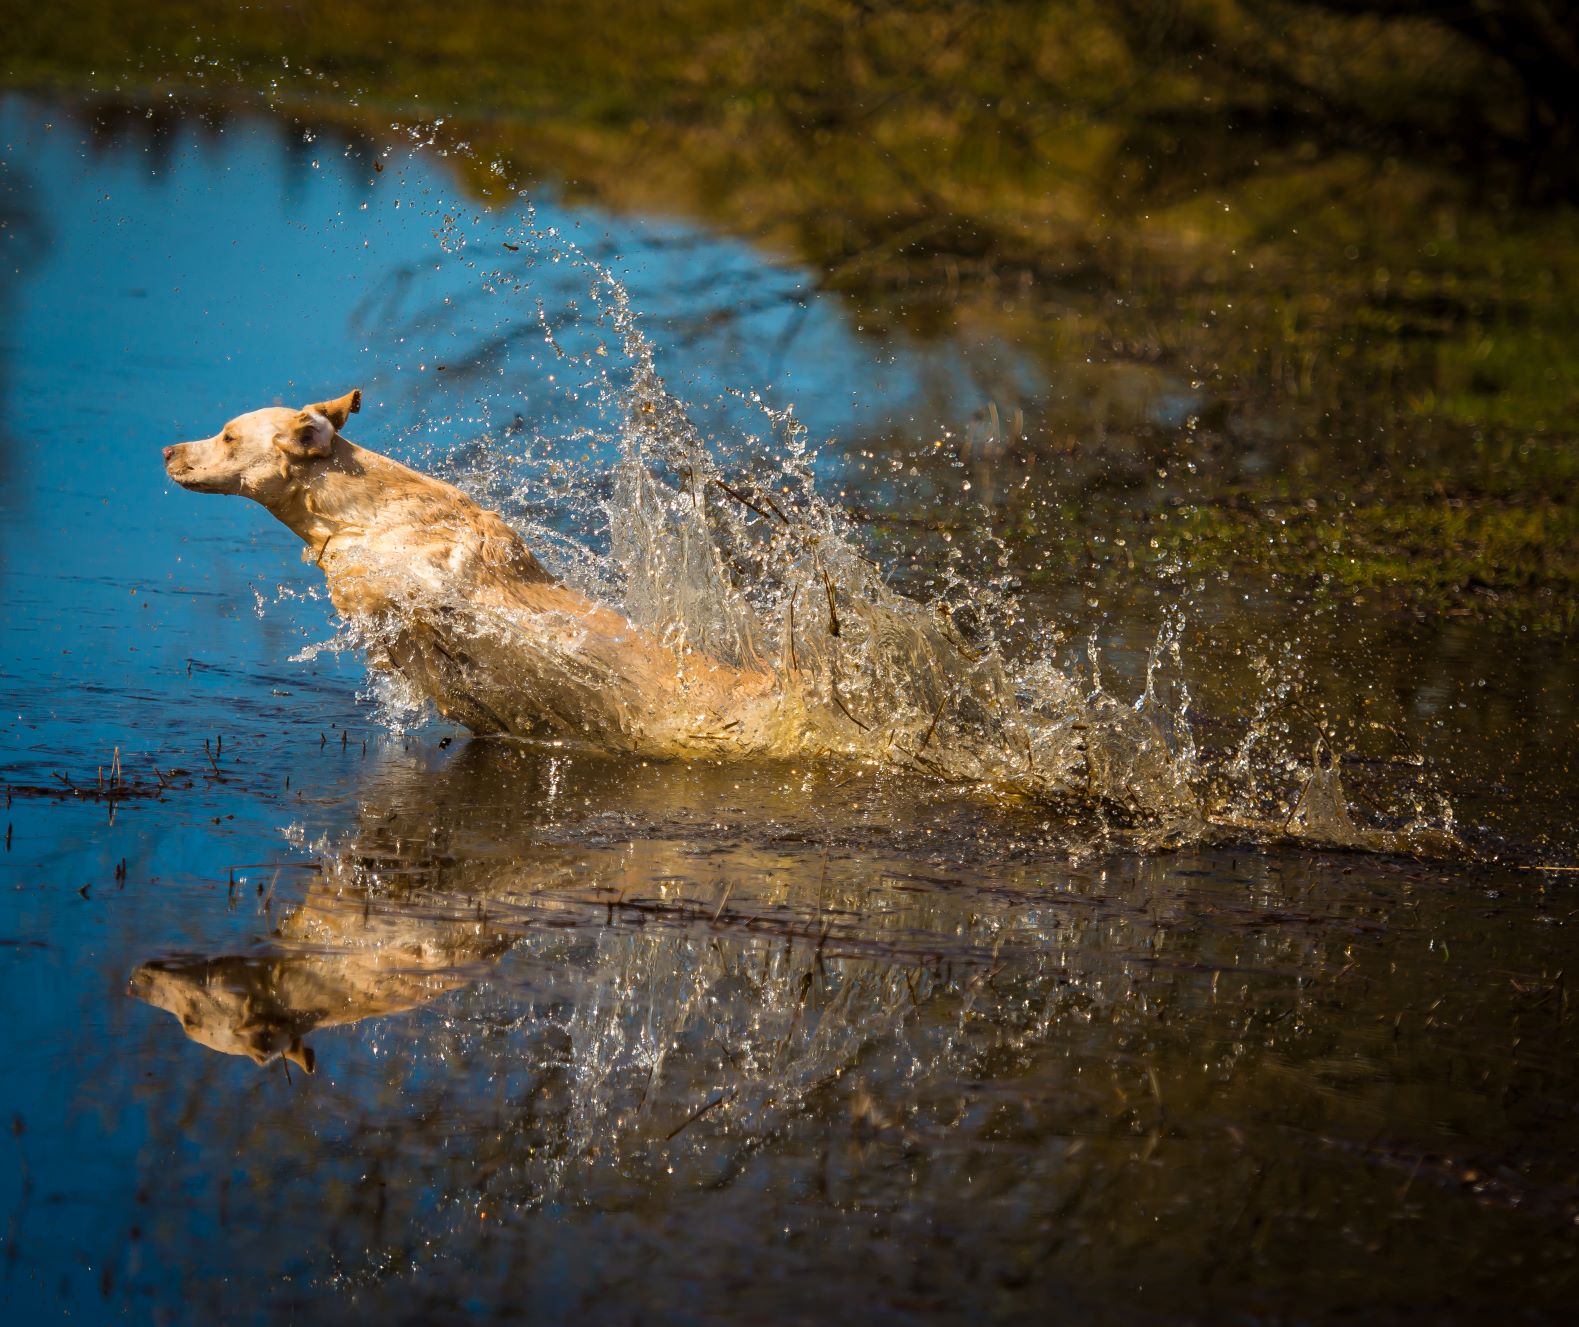 yellow labrador jumping into pond of water